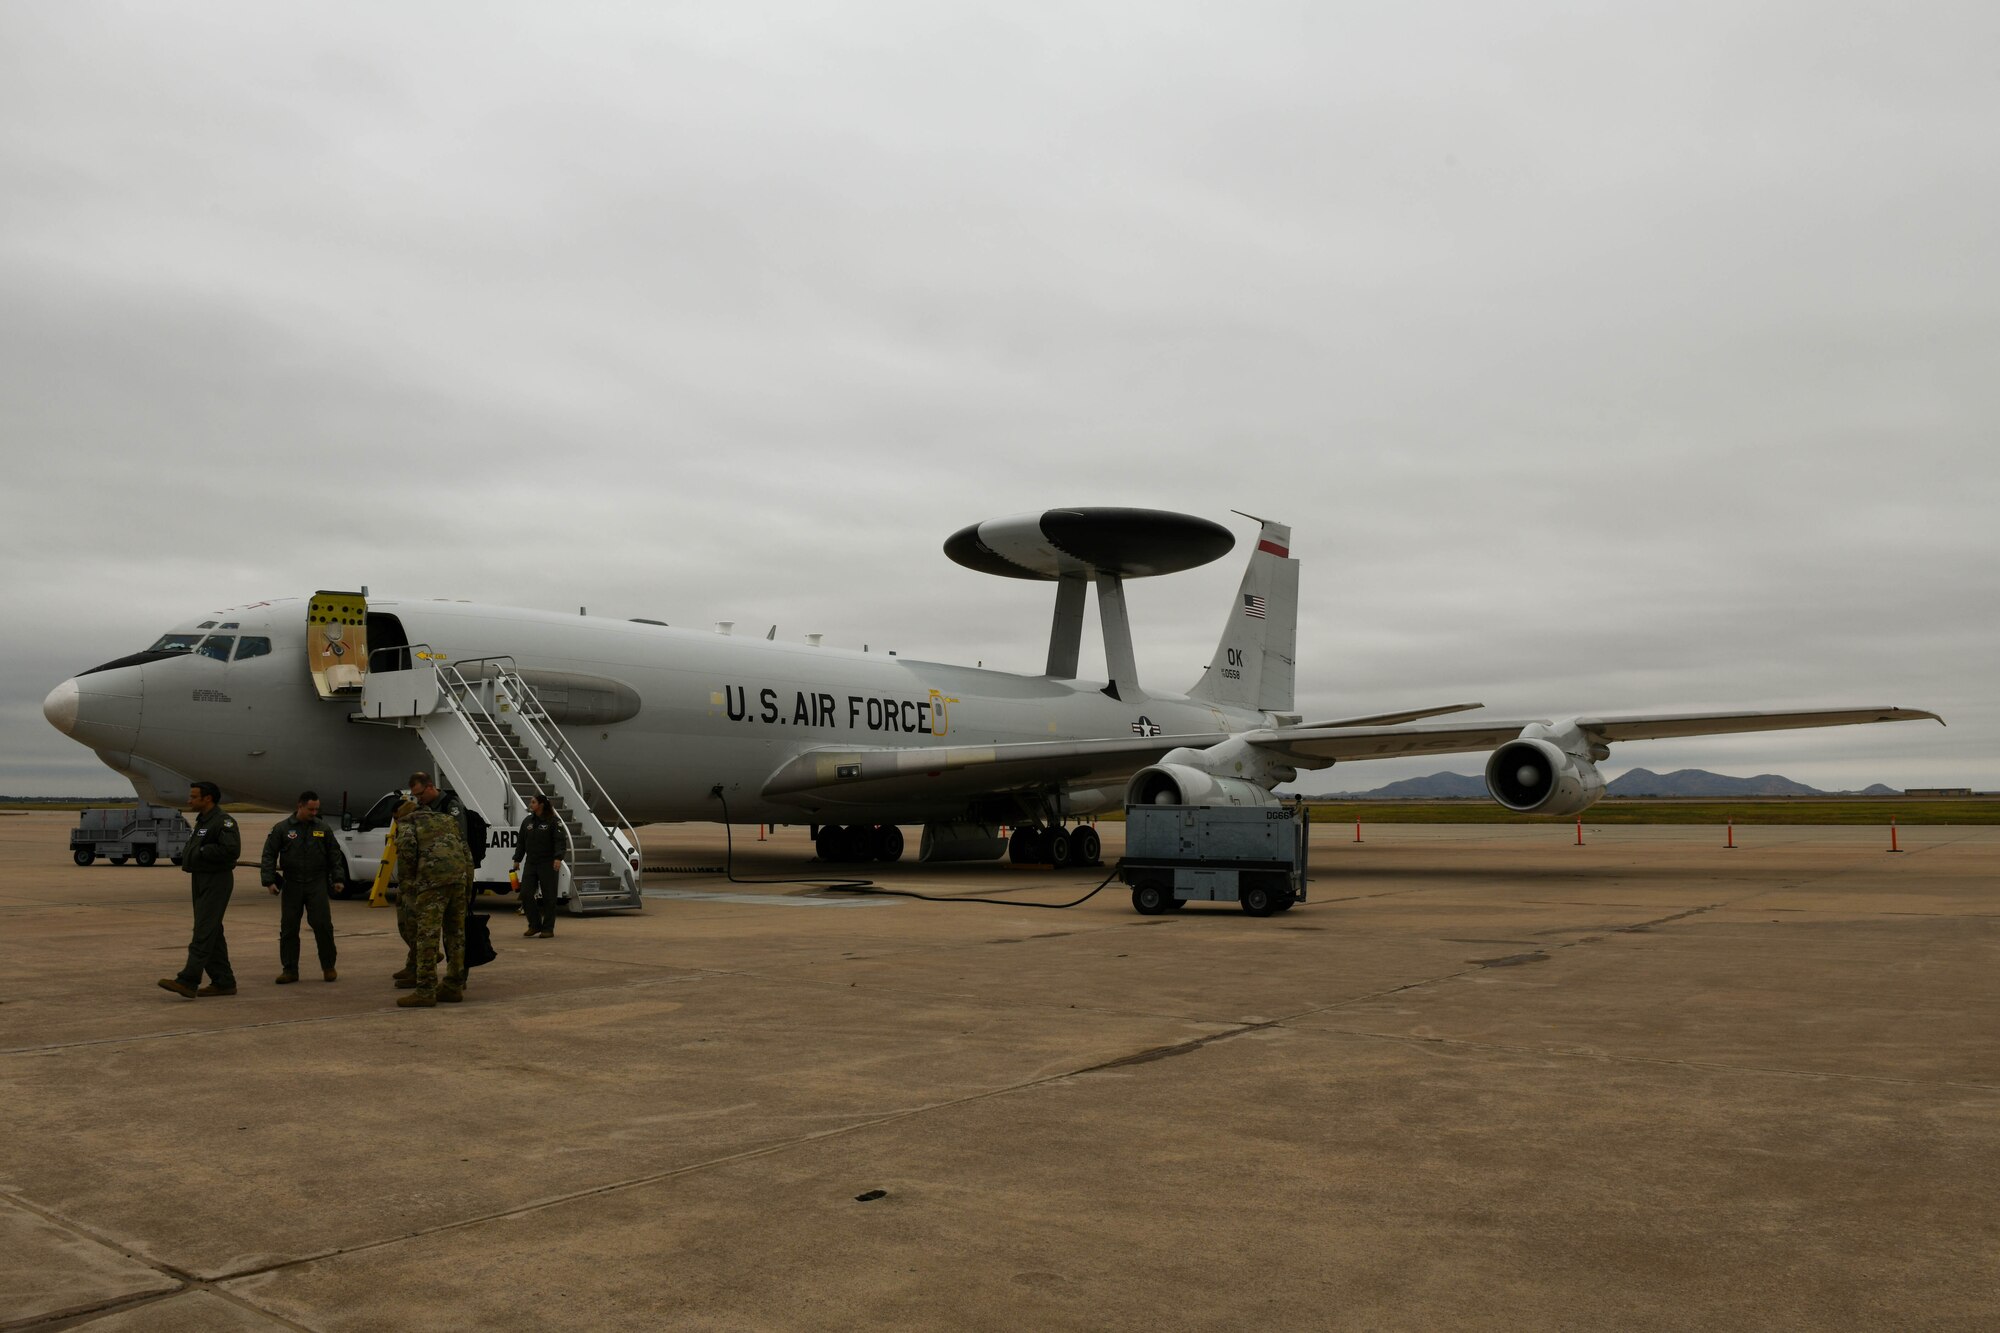 A U.S. Air Force E-3 Sentry Airborne Warning and Control Systems (AWACS) aircraft waits on the flightline at Altus Air Force Base (AFB), Oklahoma, Nov. 2, 2021. The 552nd Operations Group, based out of Tinker AFB, is tasked with the operations, maintenance, logistics, training and combat support of AWACS. (U.S. Air Force photo by Airman 1st Class Trenton Jancze)